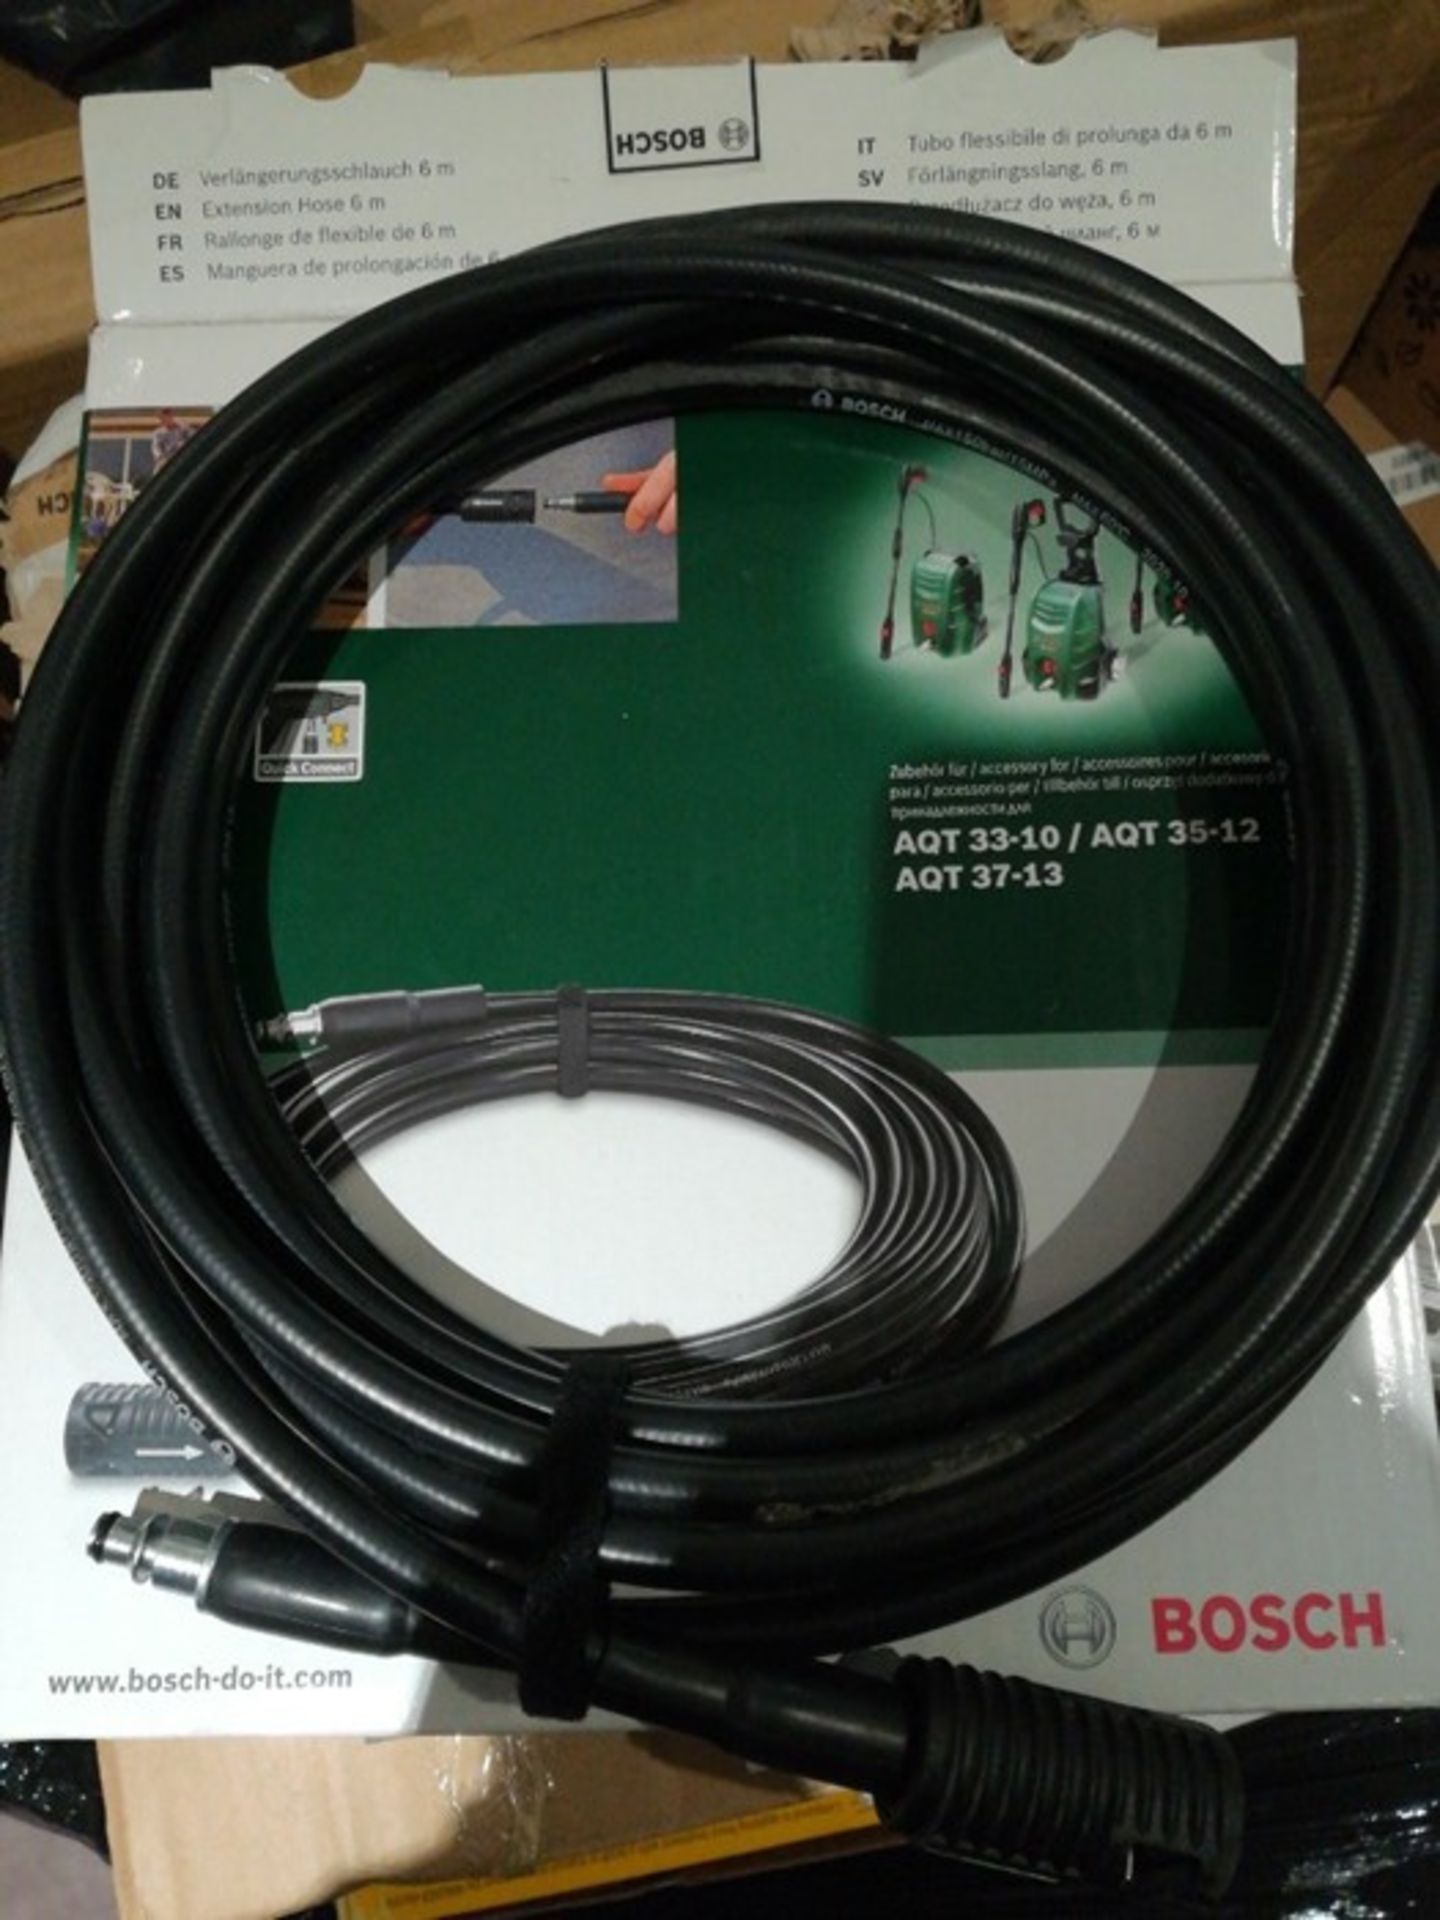 Bosch F016800361 6 m Extension Hose for AQT High Pressure Washers - Image 2 of 2